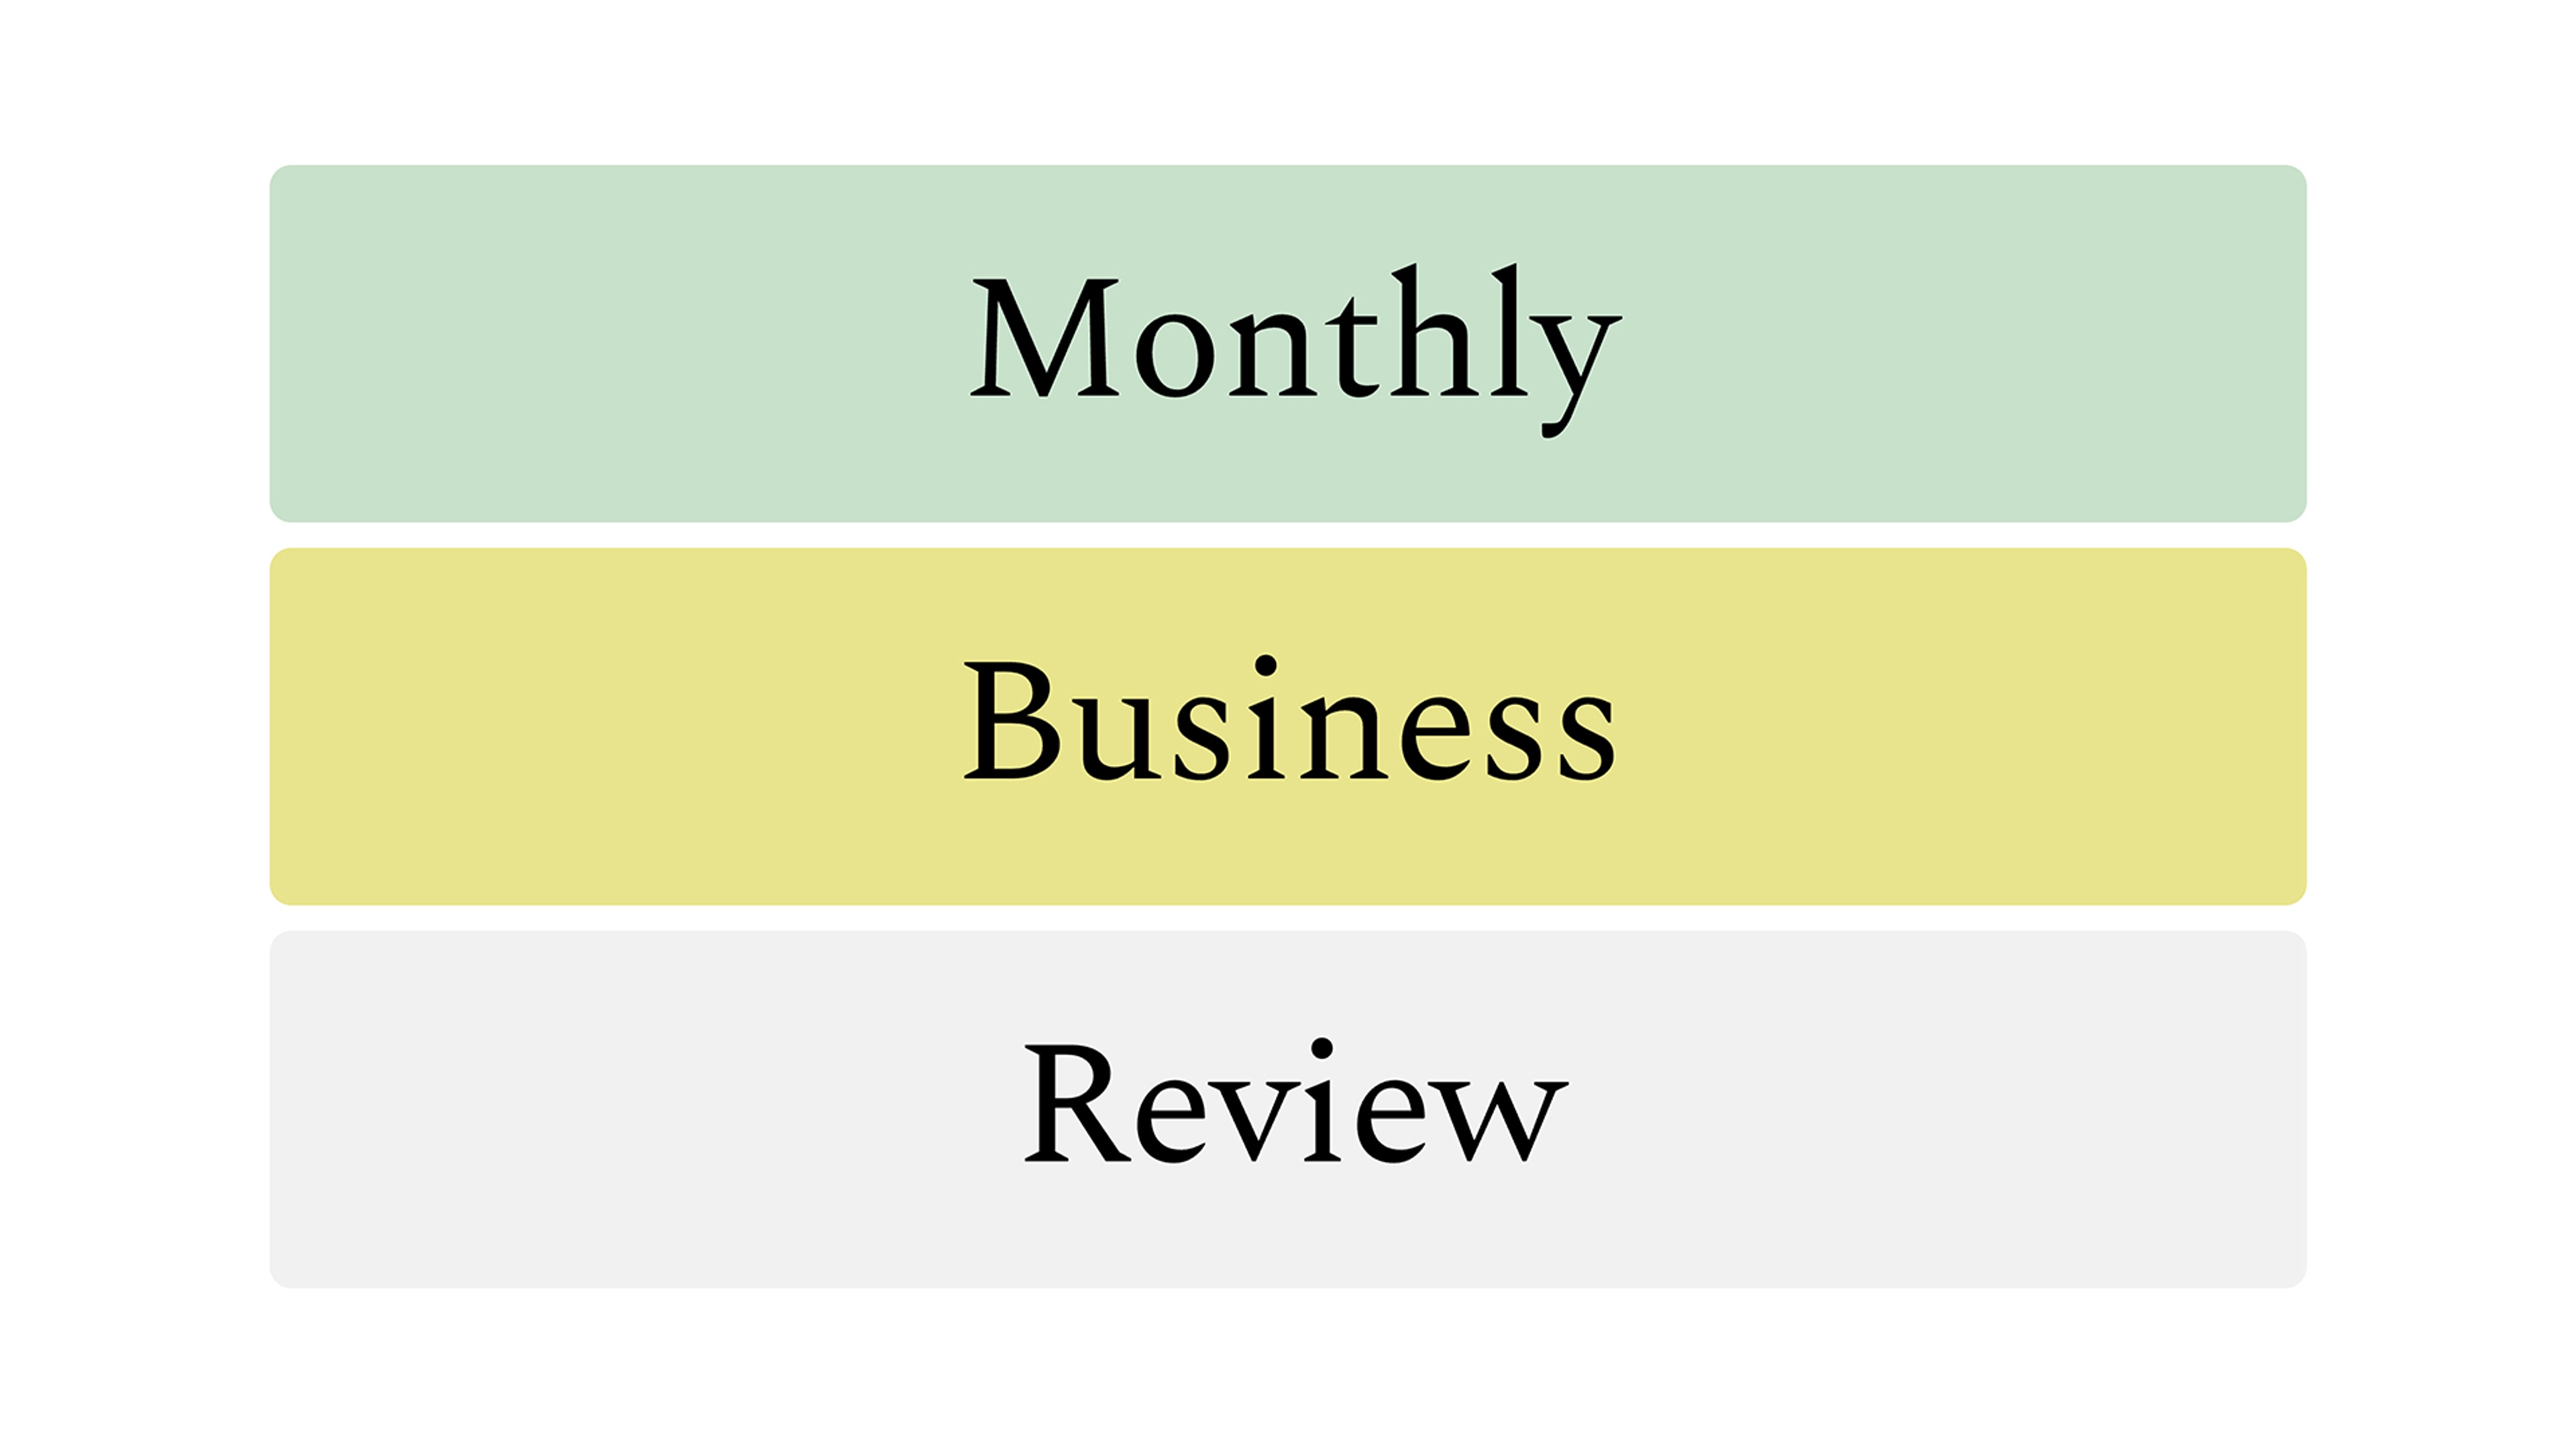 Monthly Business Review - Title